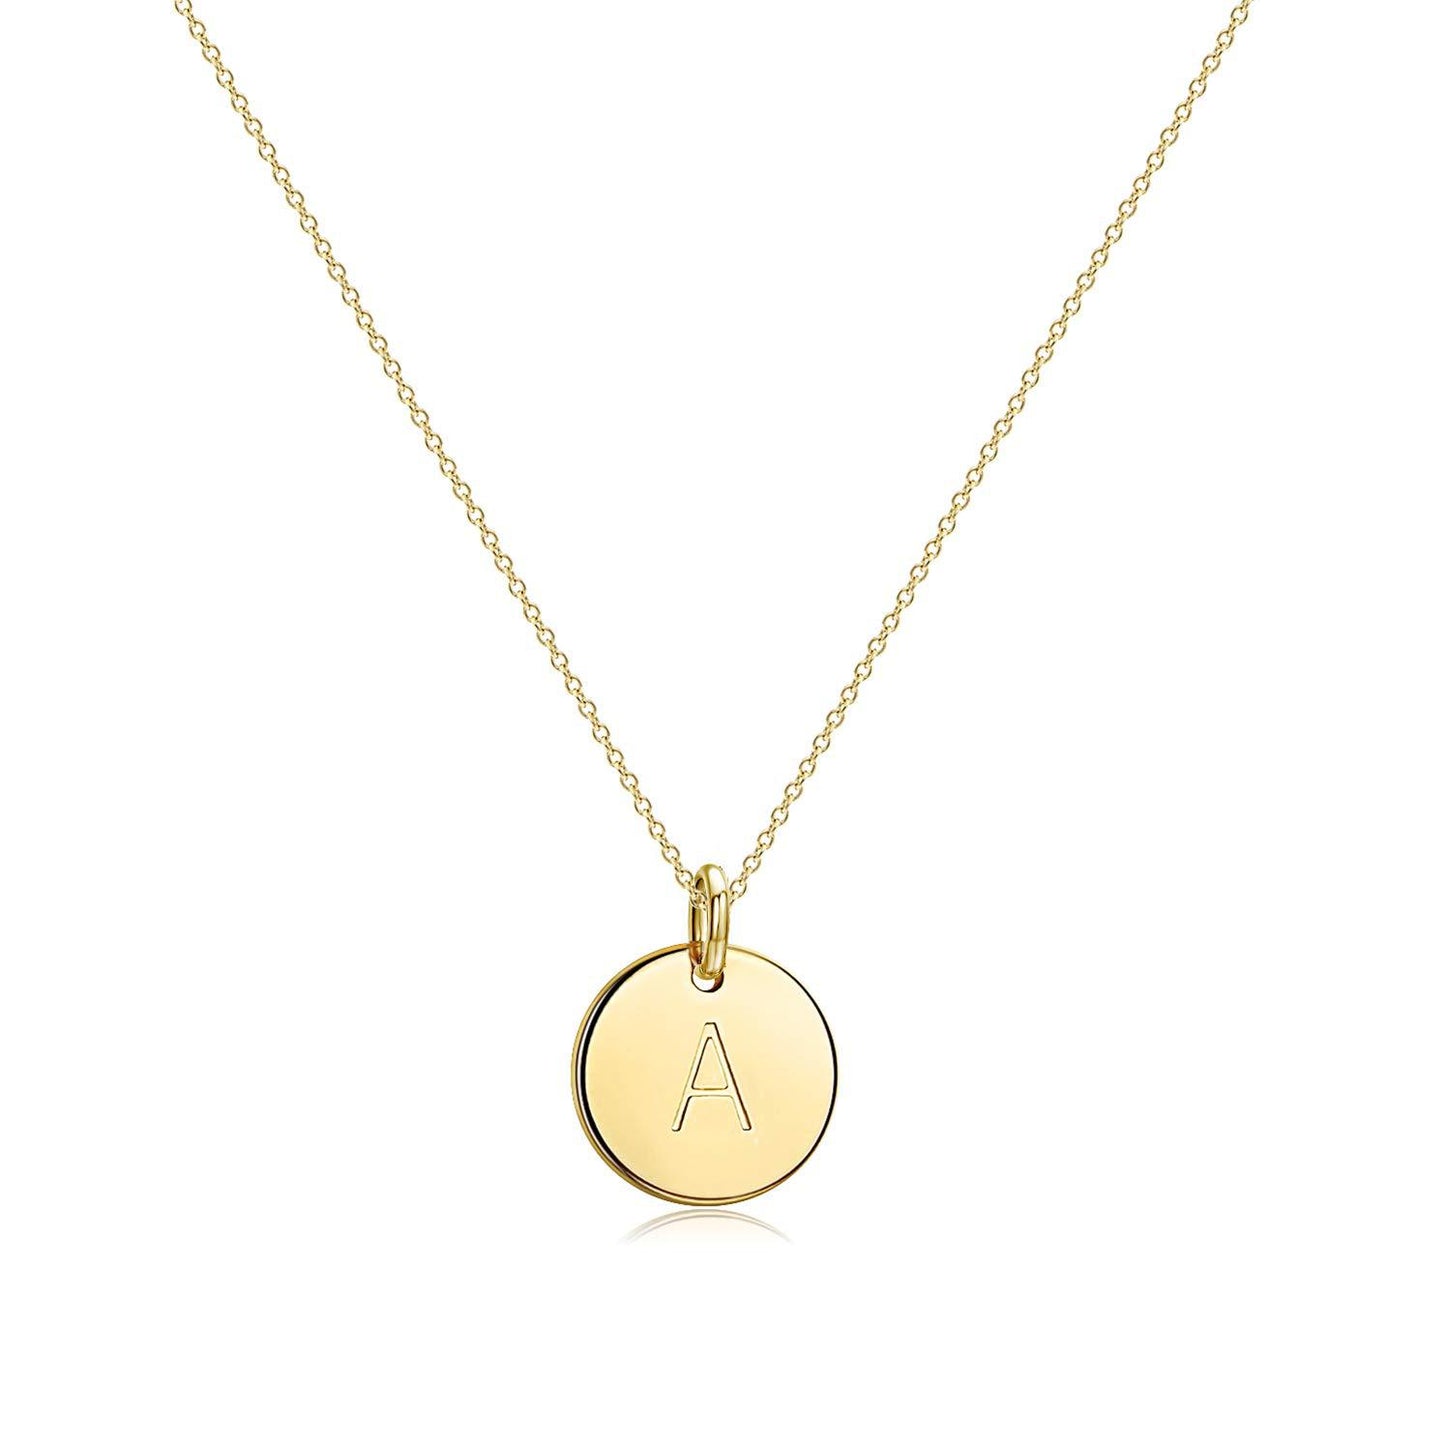 DISC INITIAL NECKLACES SILVER/GOLD